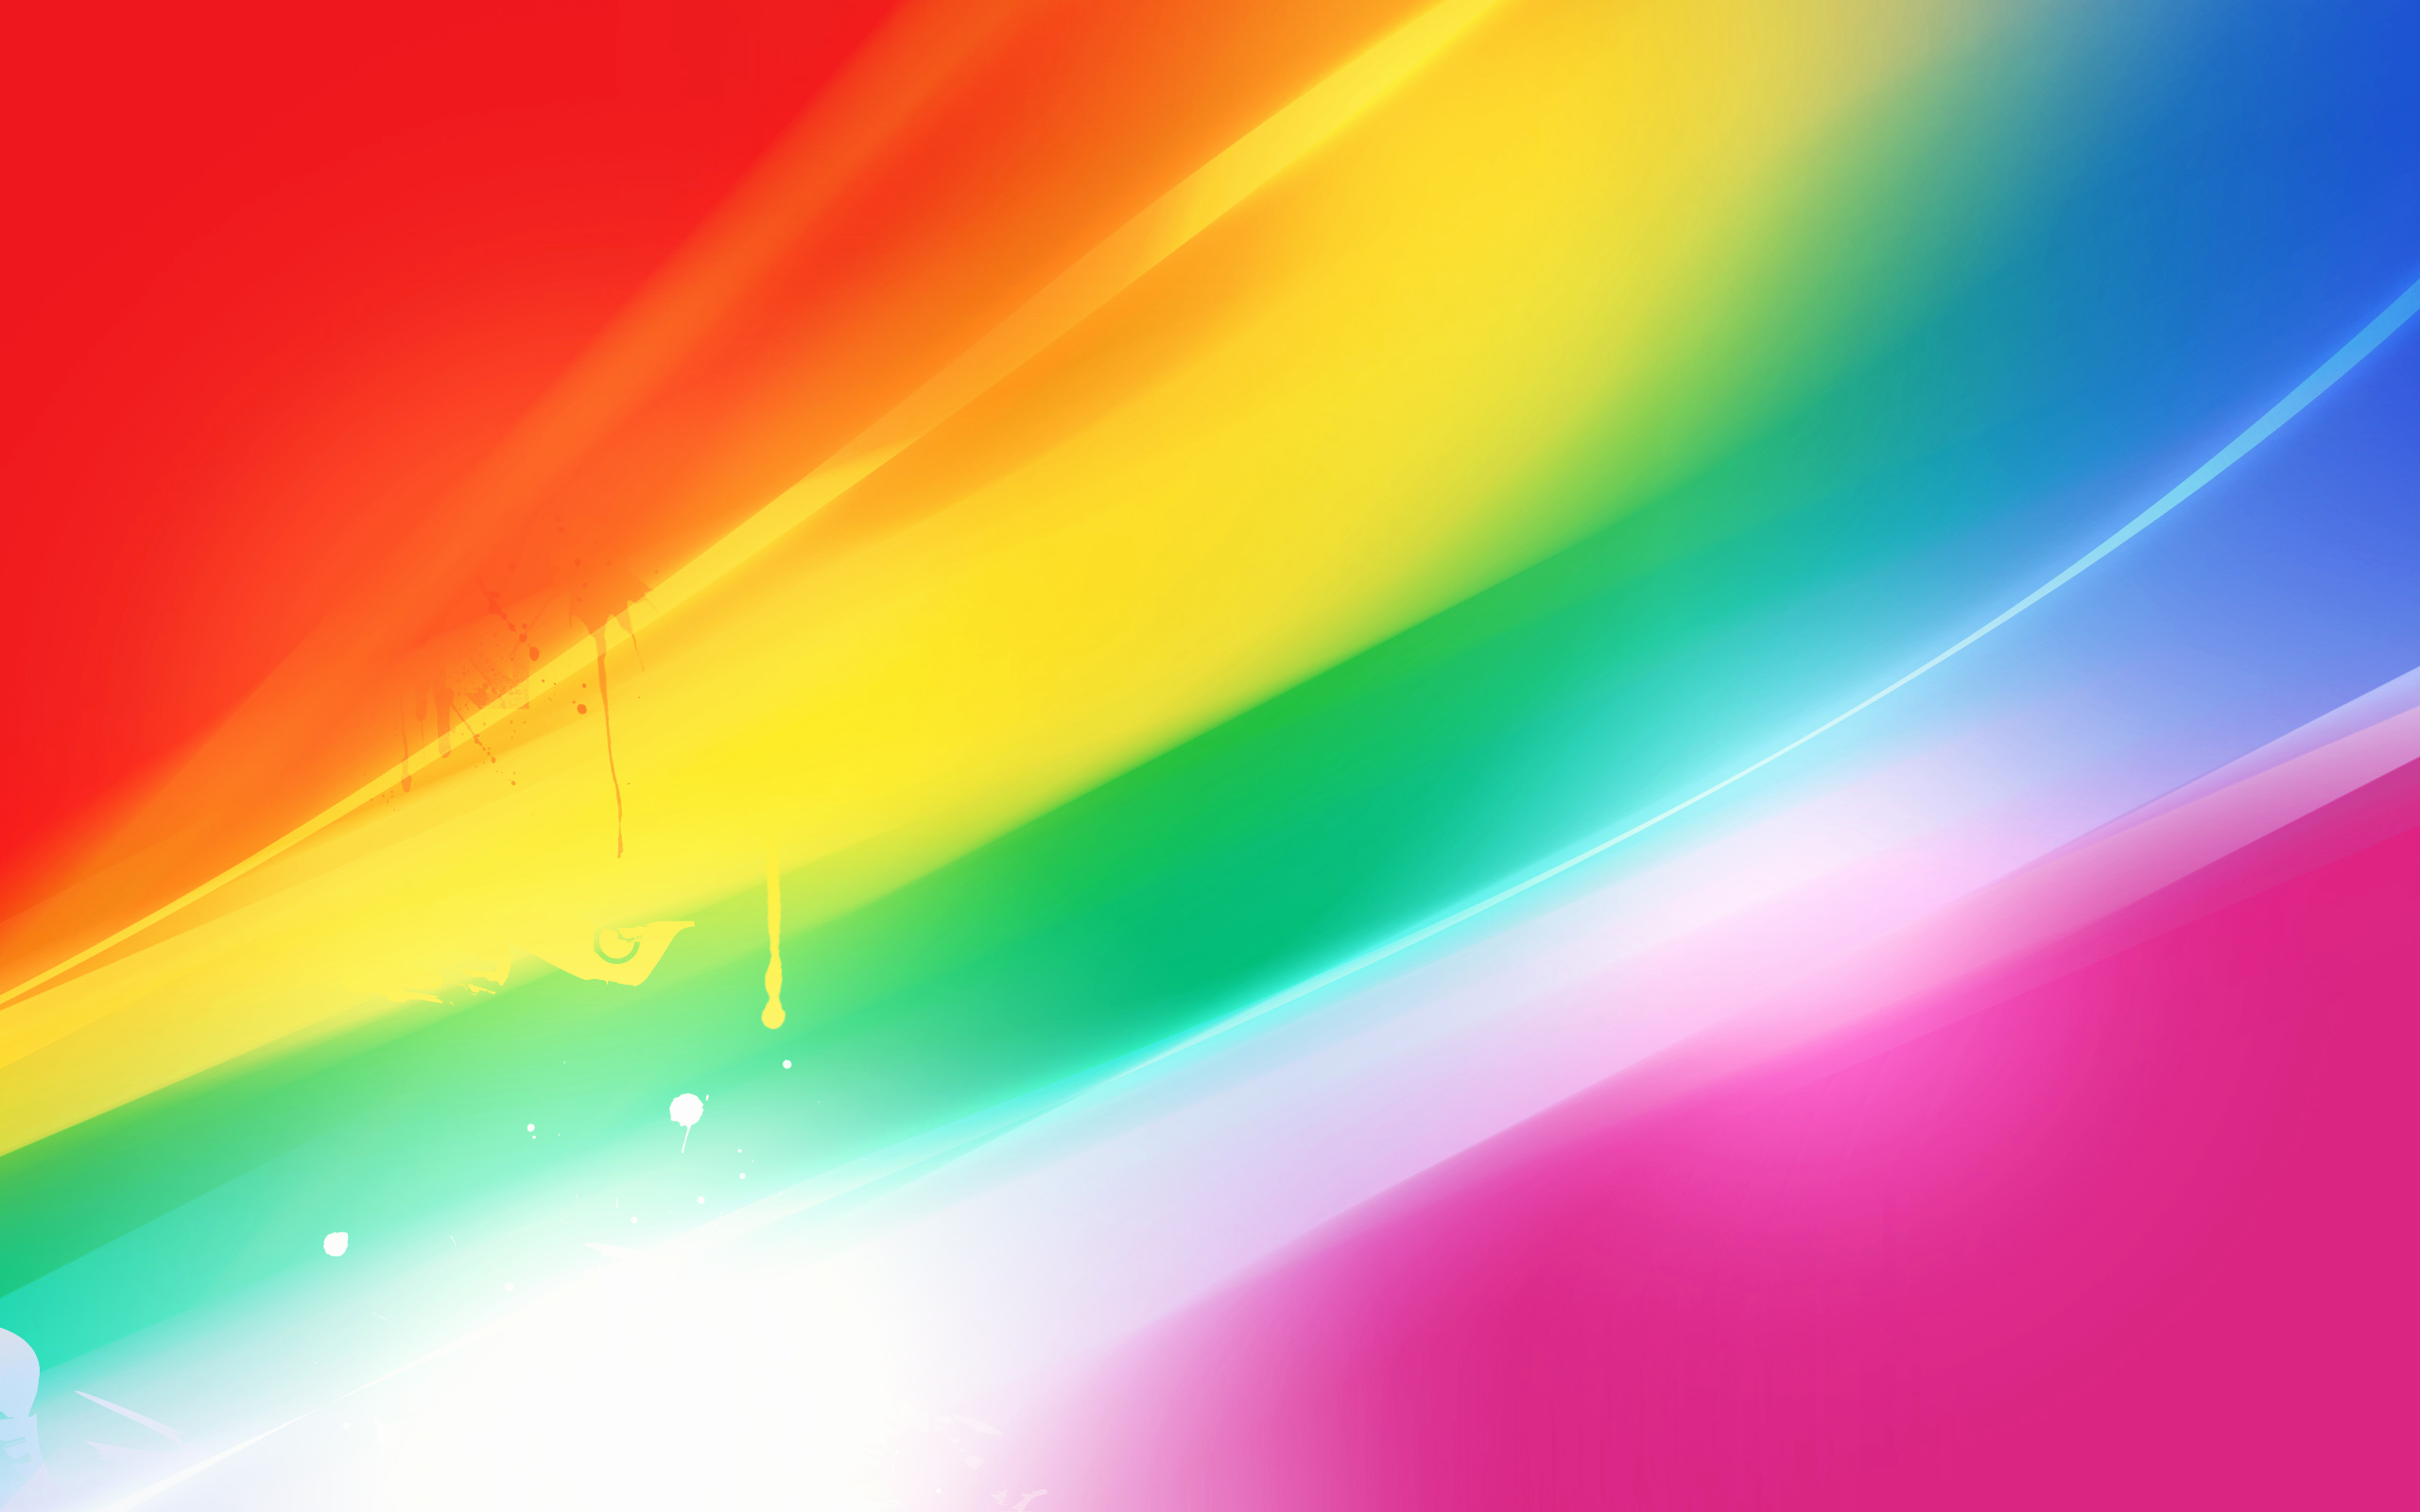 Inspirational Color Wallpapers Hd - Rainbow Color Background Hd - HD Wallpaper 